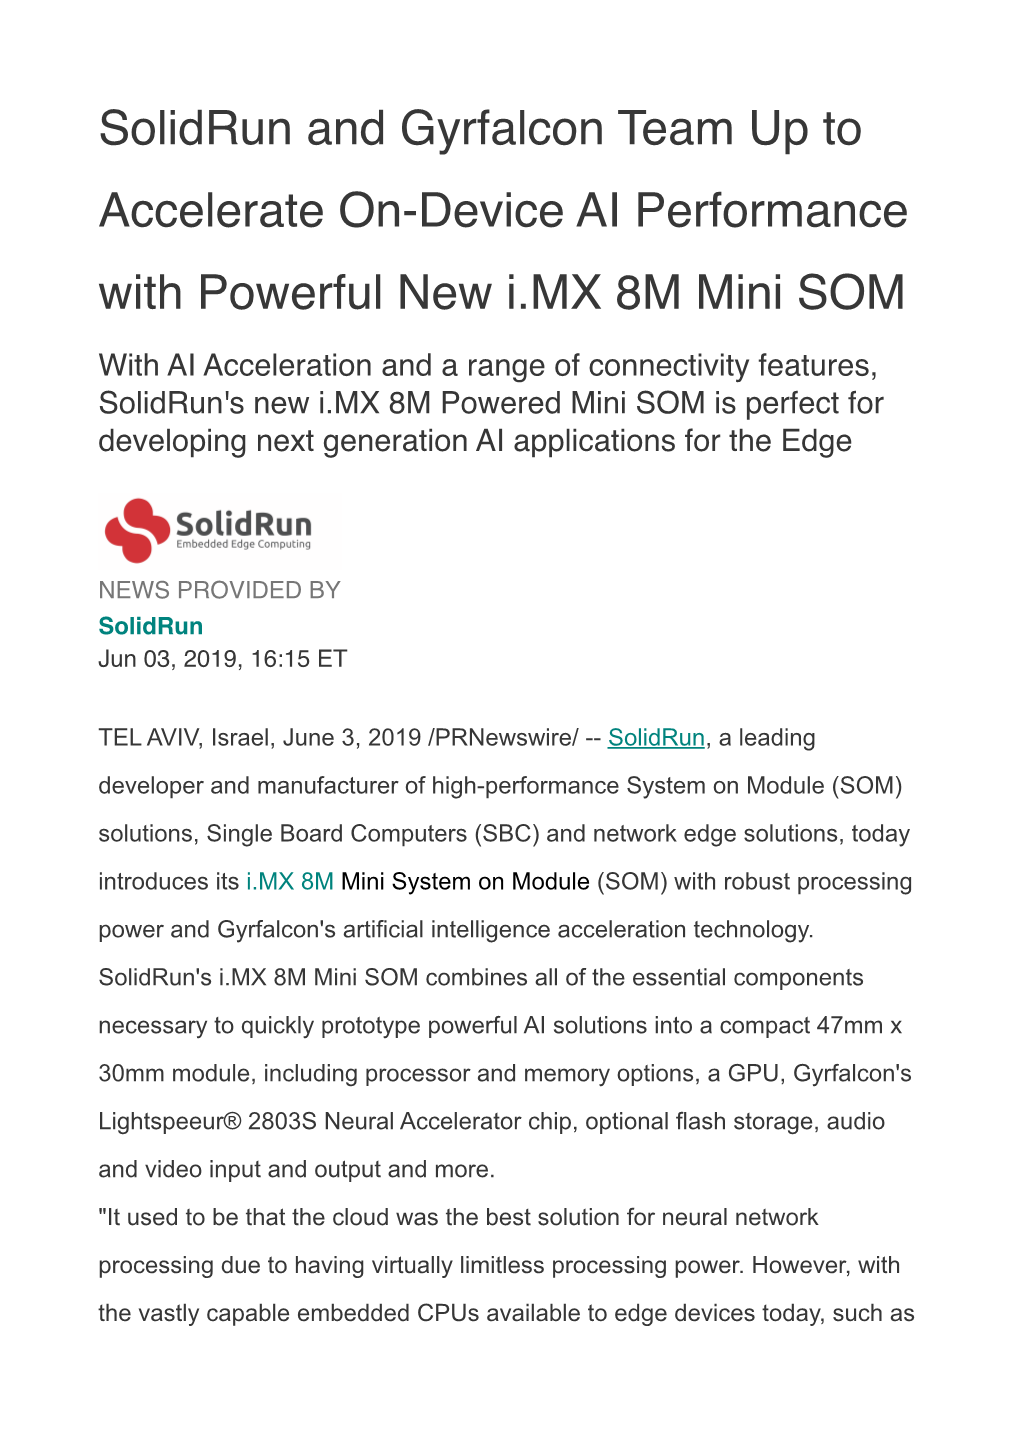 Solidrun and Gyrfalcon Team up to Accelerate On-Device AI Performance with Powerful New I.MX 8M Mini SOM